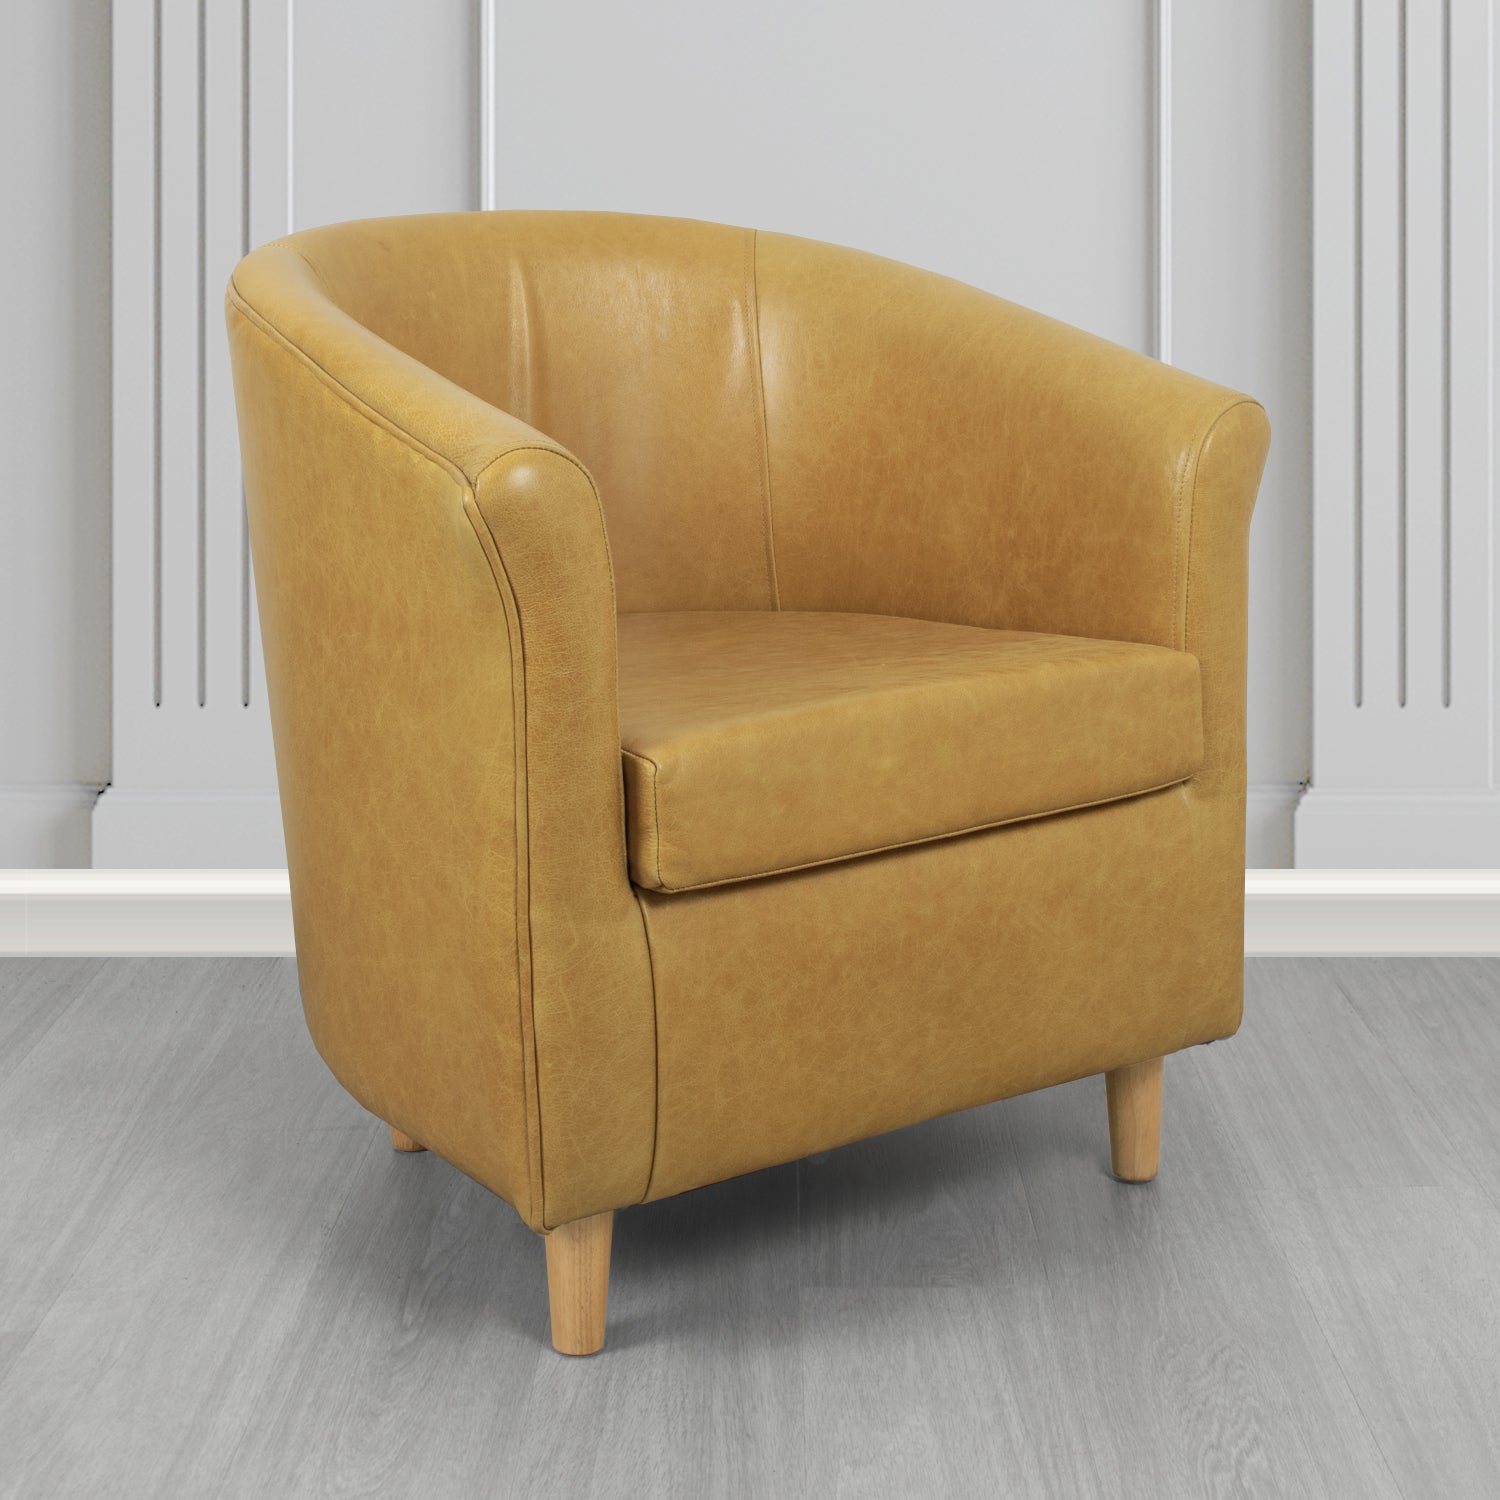 Tuscany Tub Chair in Crib 5 Old English Saddle Genuine Leather - The Tub Chair Shop